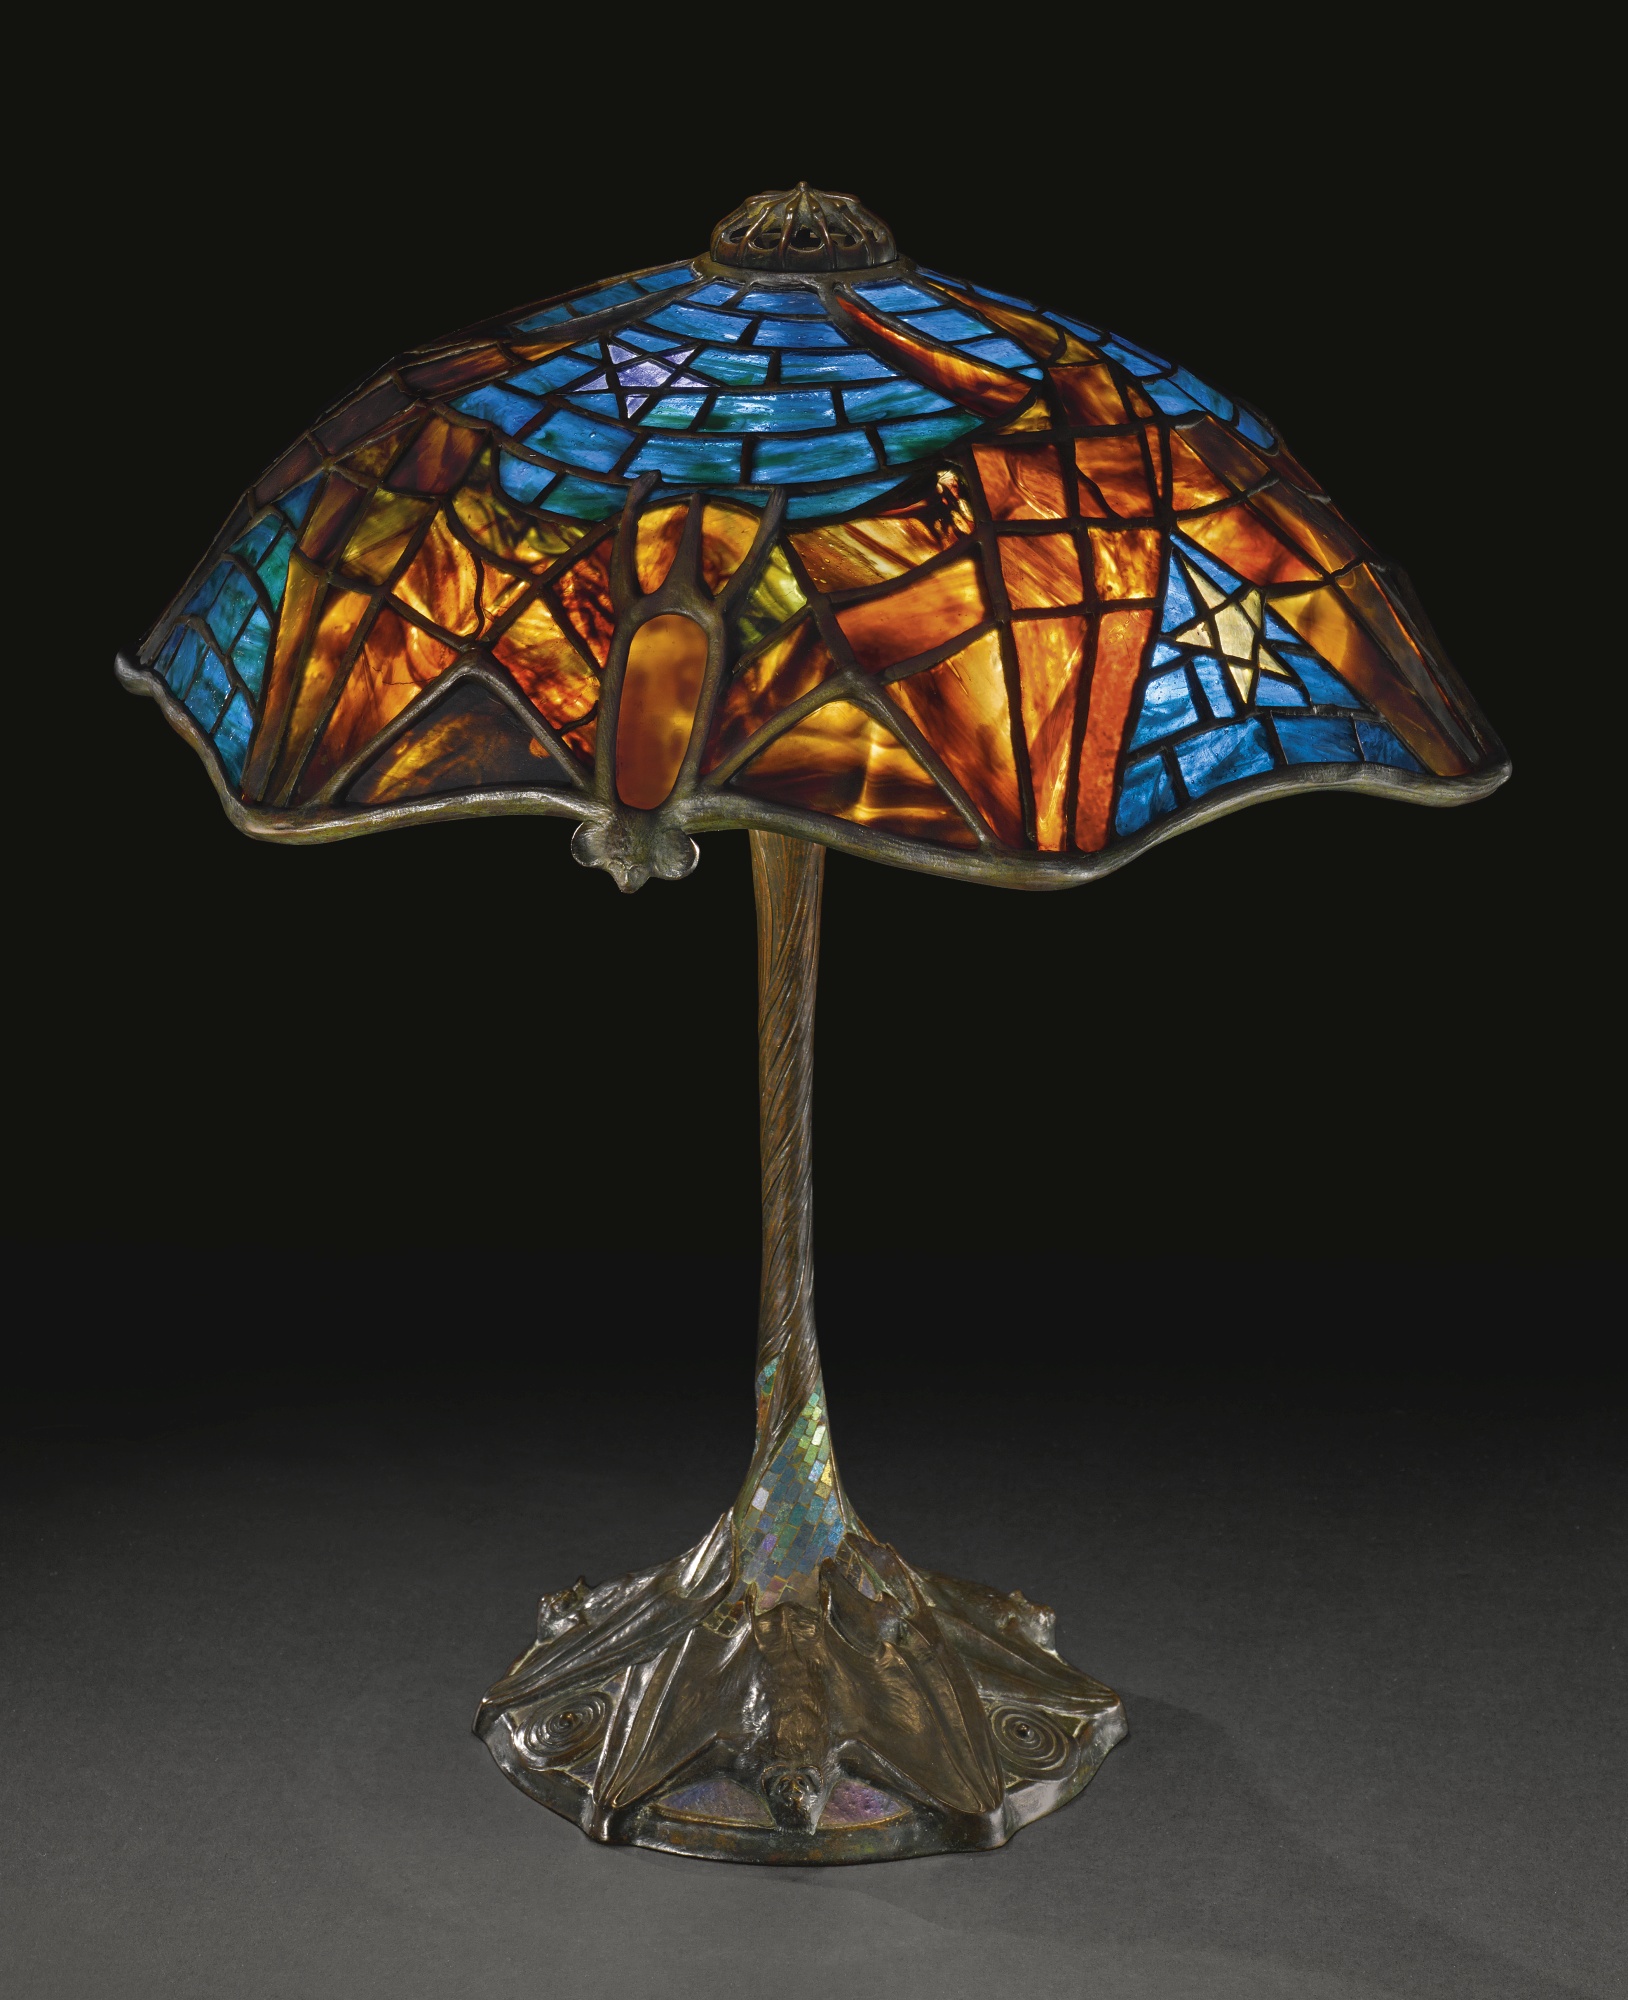 Tiffany masterpieces return to USA for Michaan's Nov. 17 auction